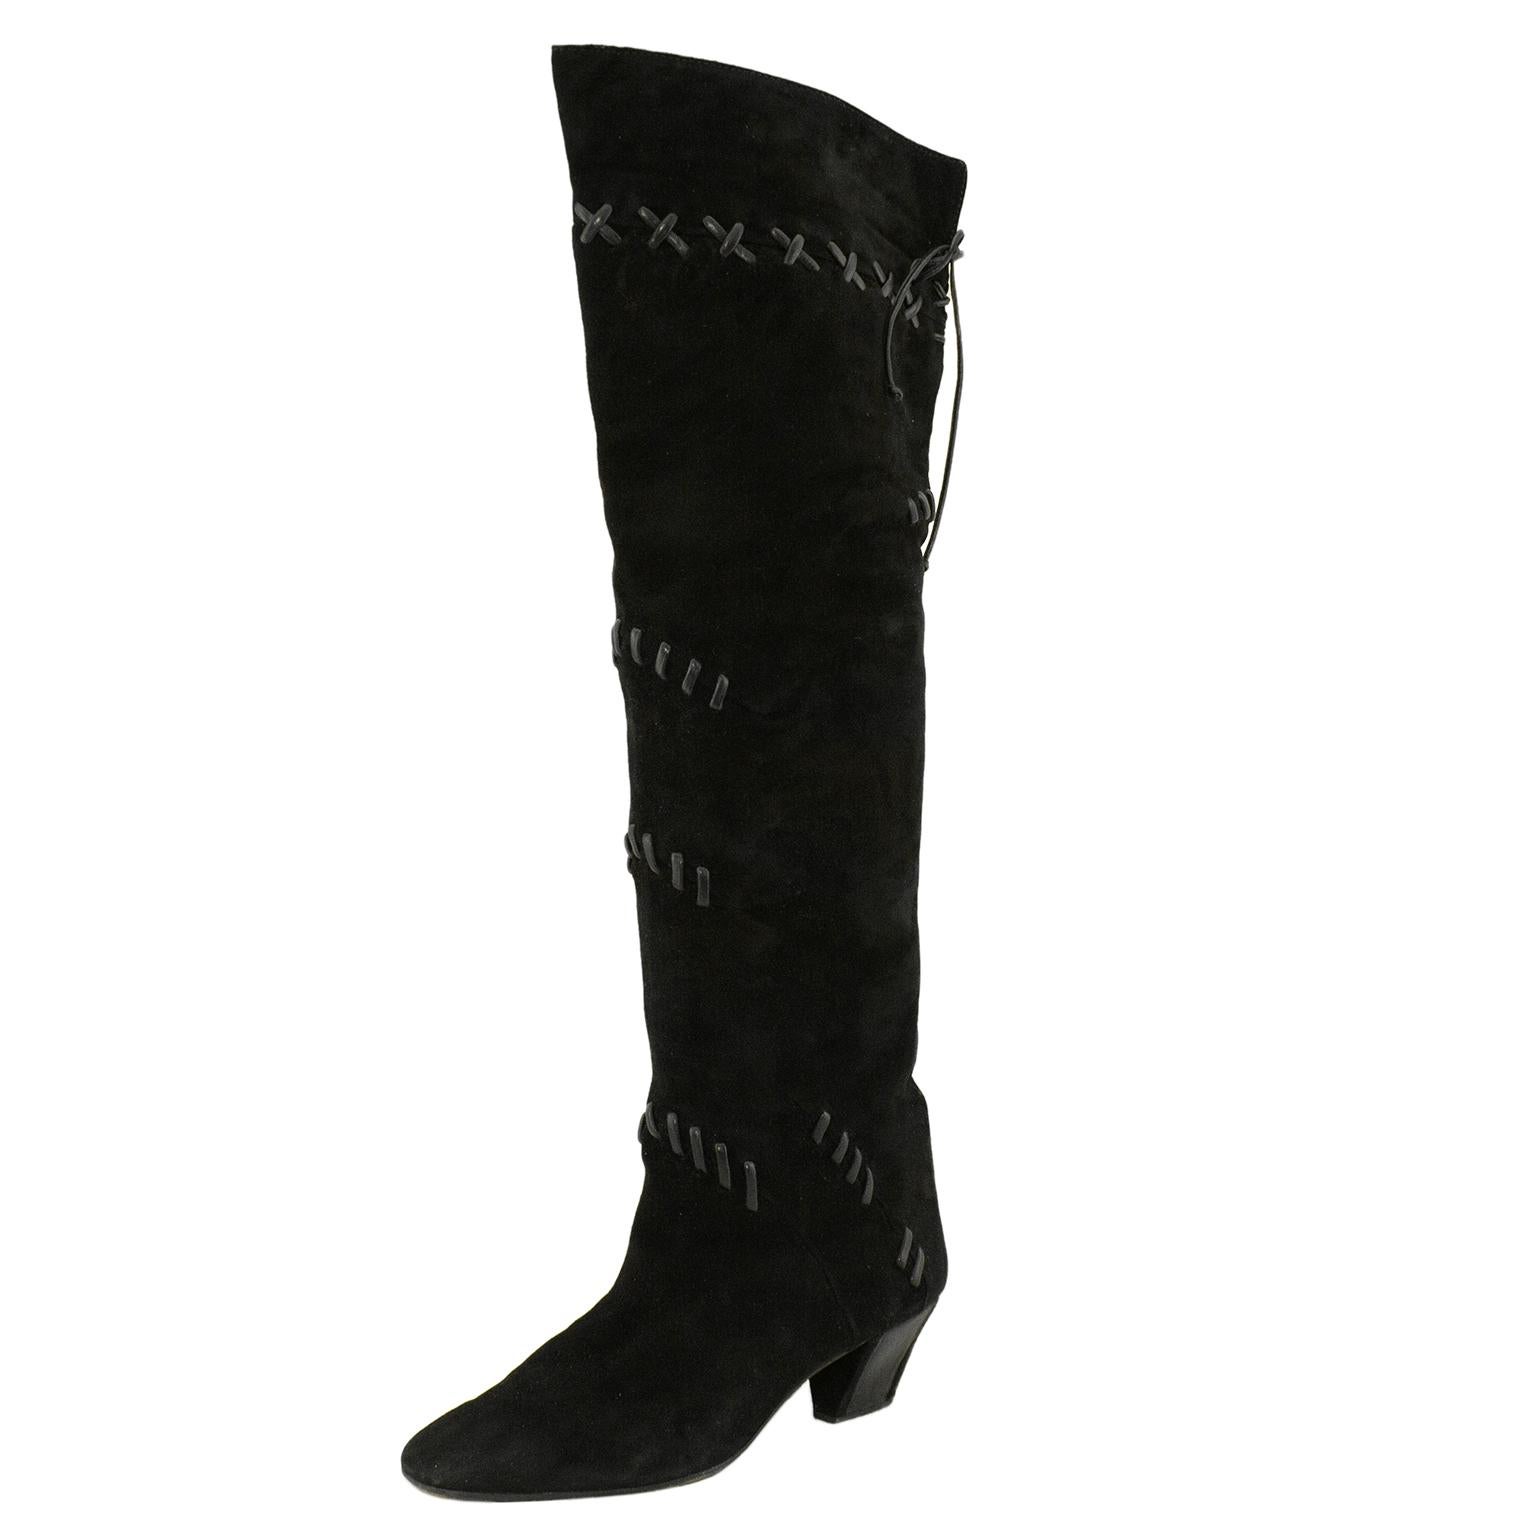 1980s Mario Valentino black suede knee high boots with whipstitch detail. The boots have an almond shaped toe box and a low to mid height block heel. Pirate inspired, the gorgeous boots come to the knee and the top flap can be worn up or folded